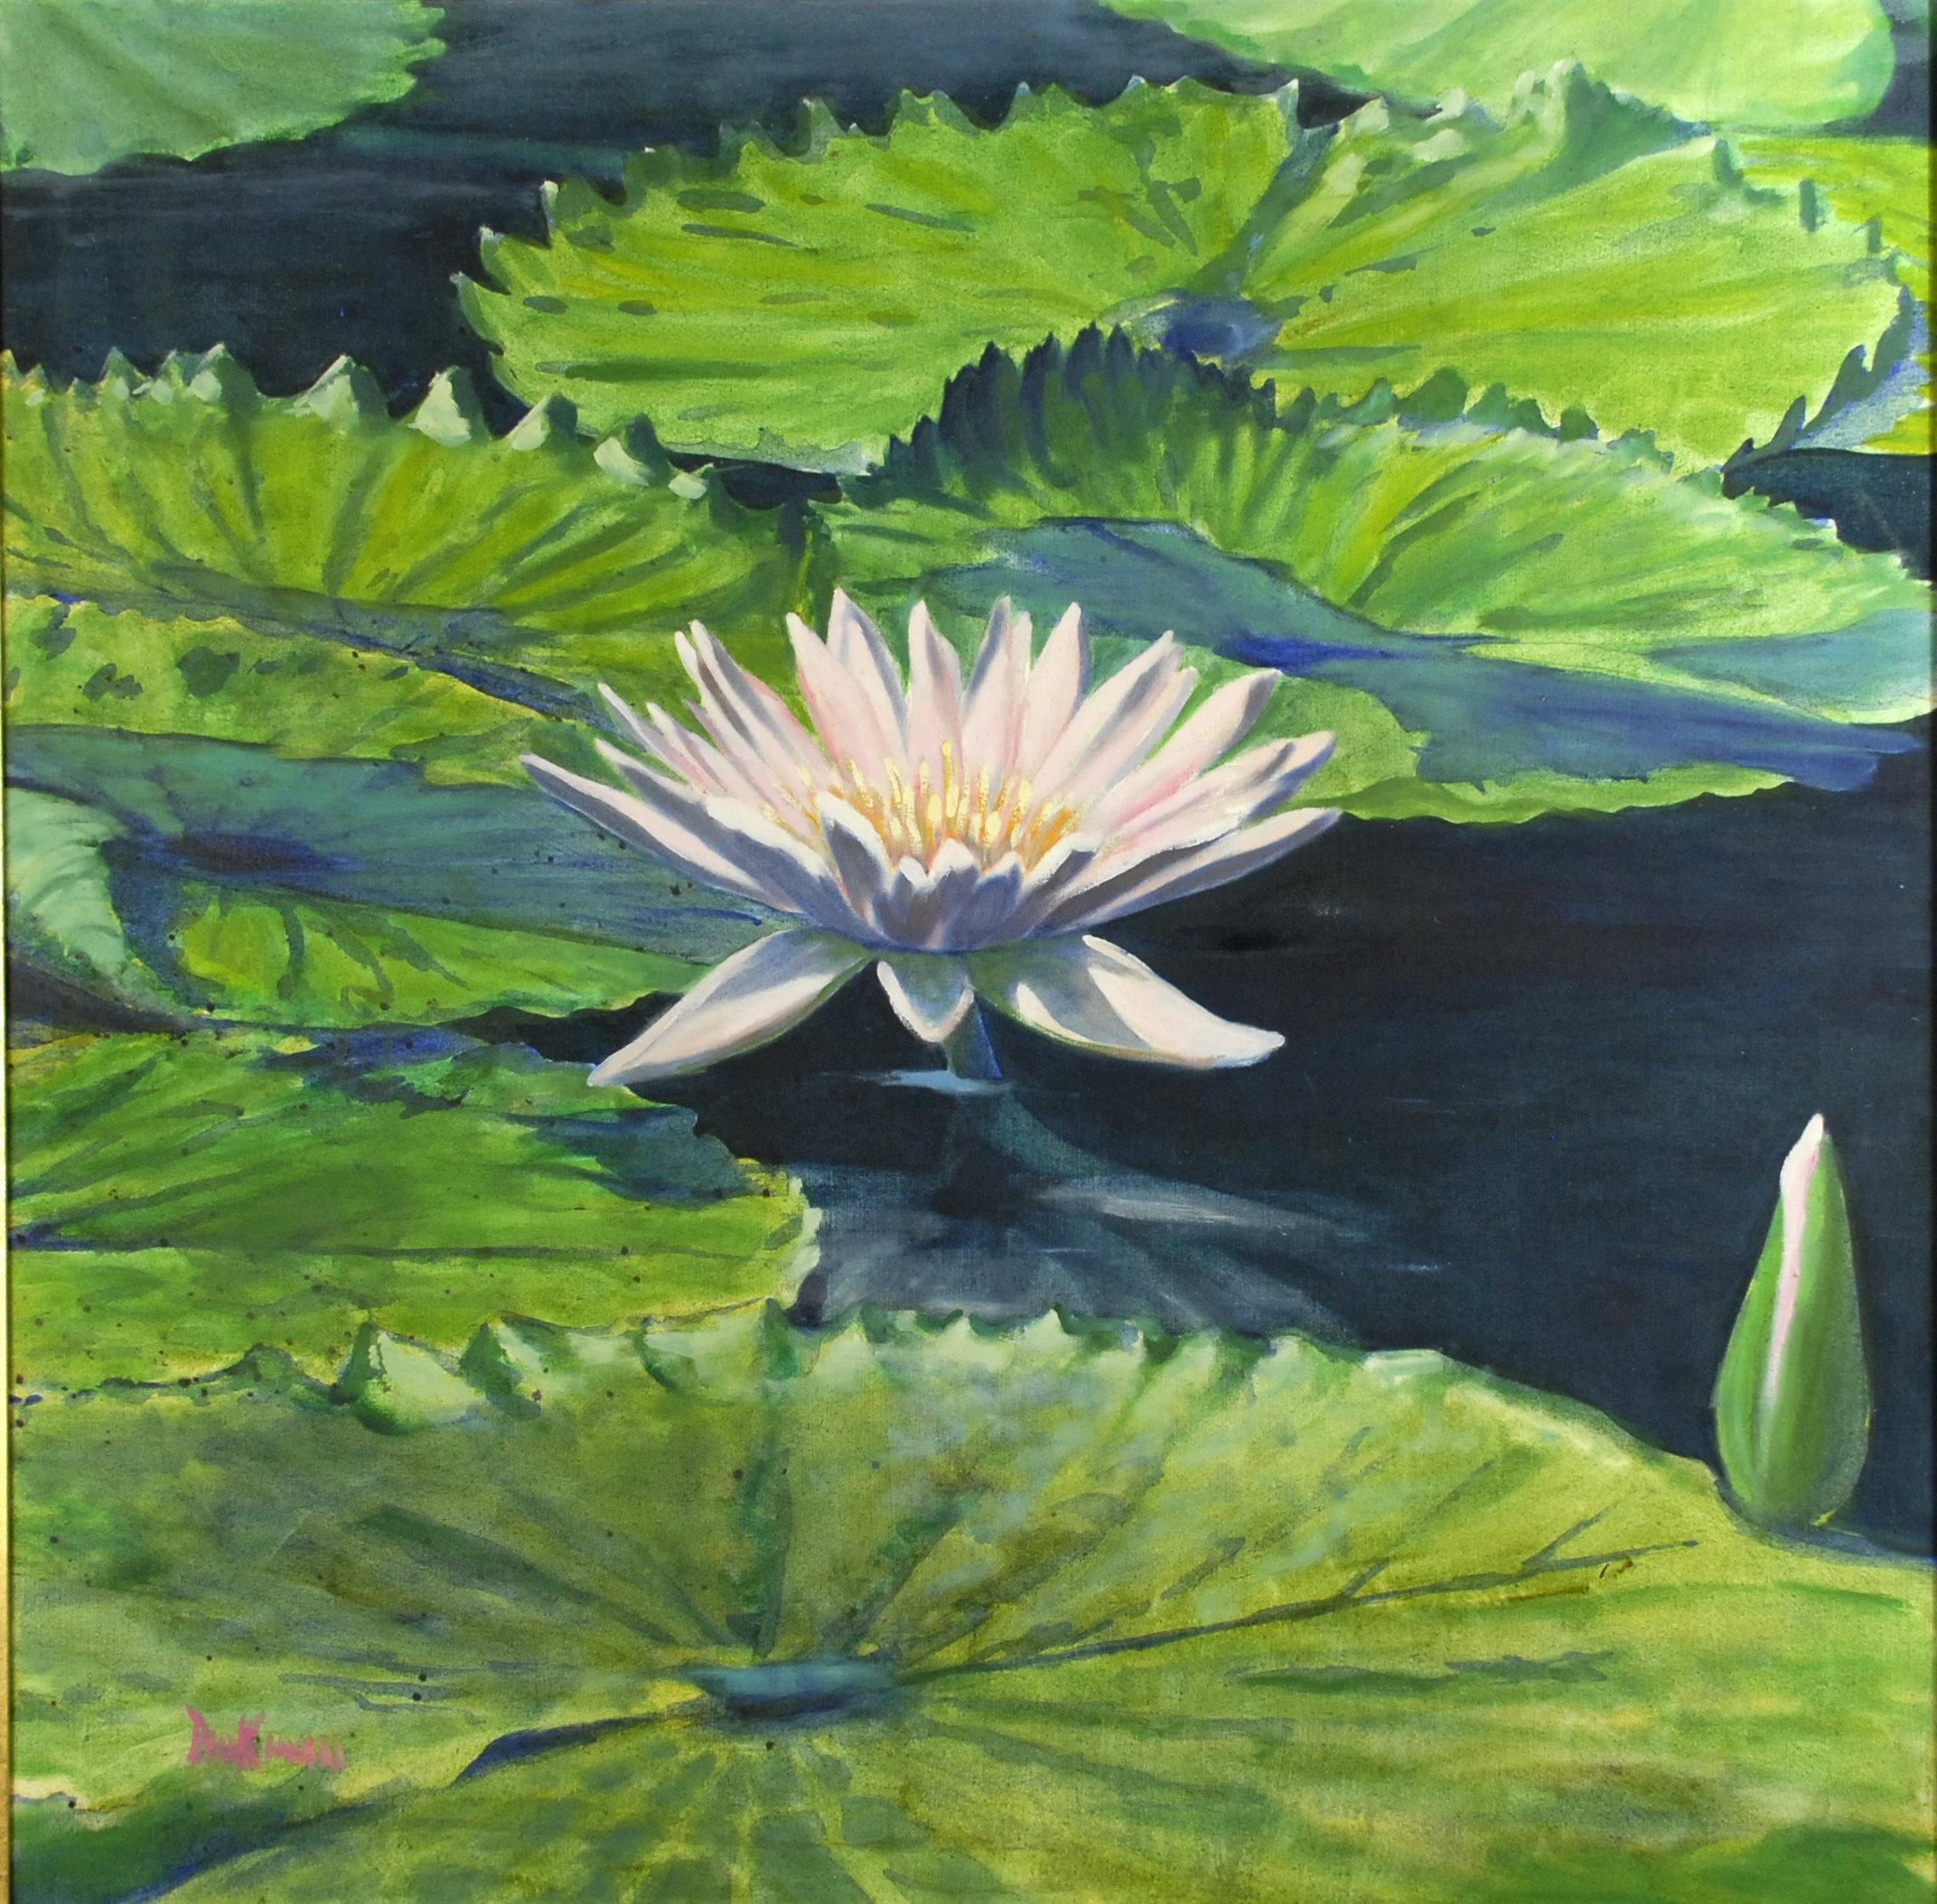 Waterlily, oil on canvas, 1988, 24 x 25 inches